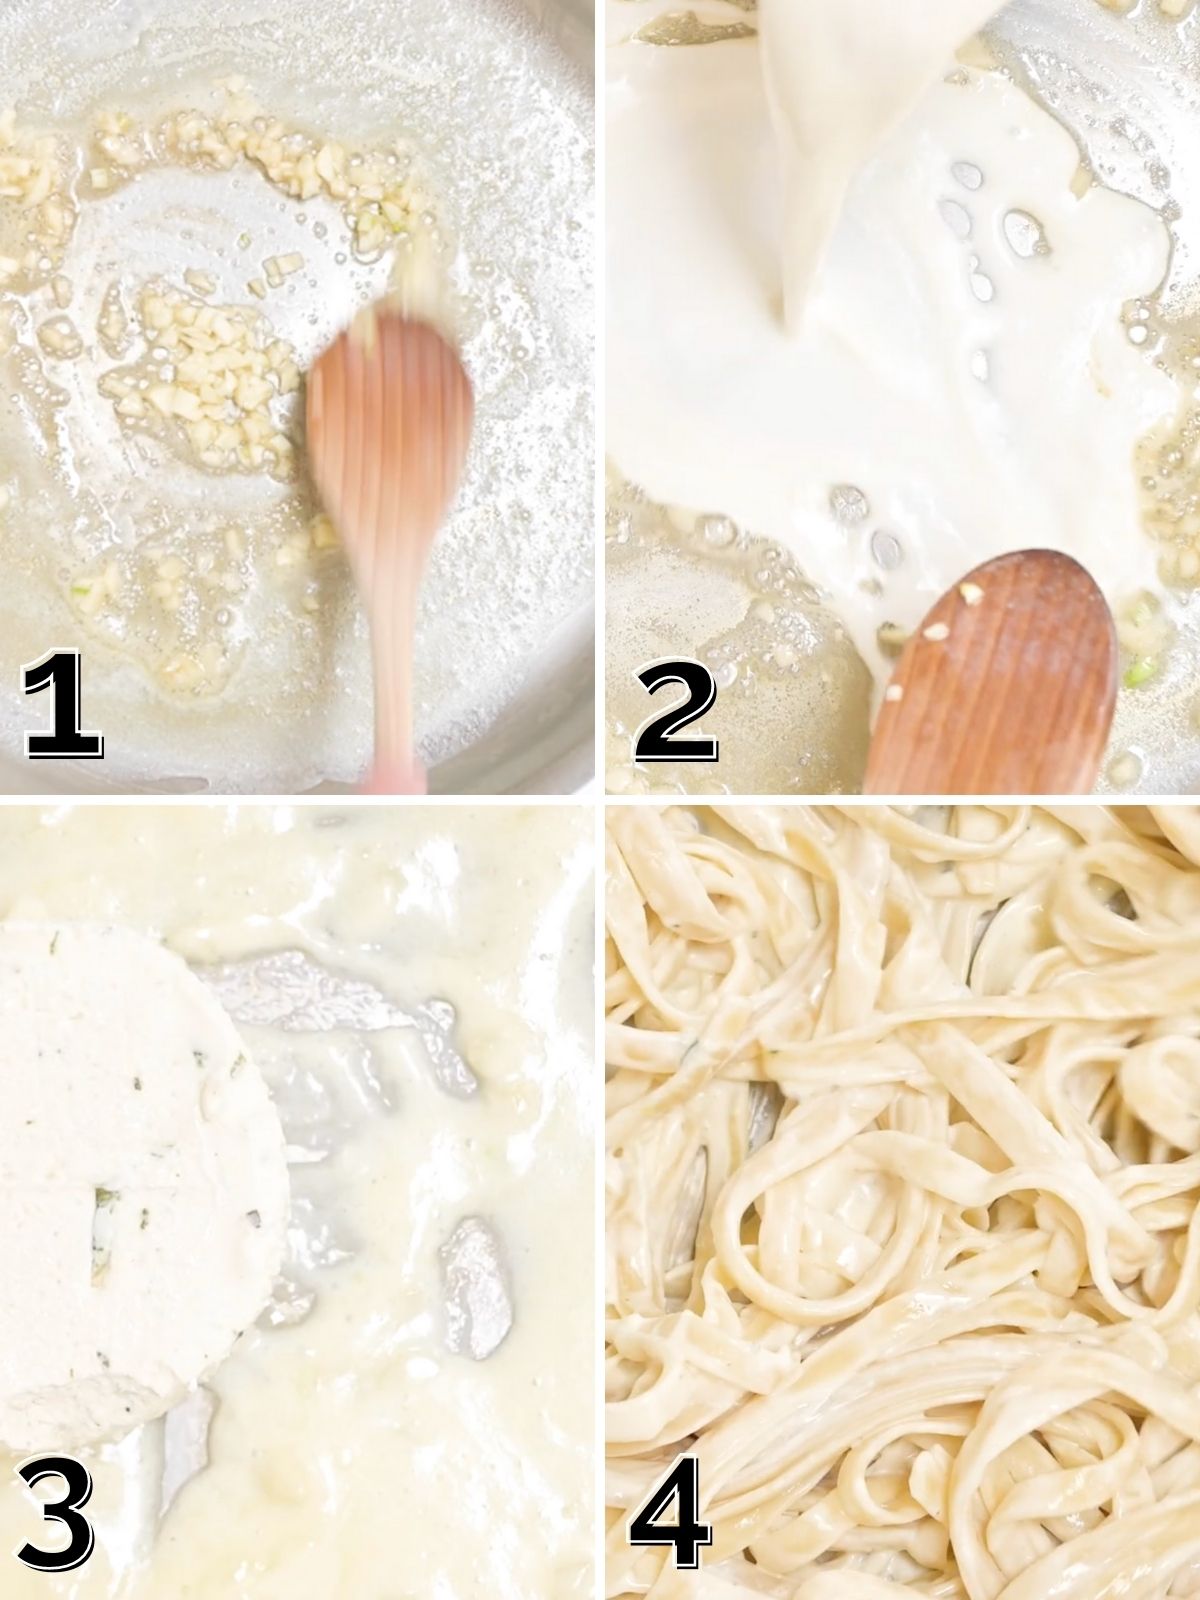 A step by step guide for melting garlic and butter, pouring in cream, melting boursin cheese, and tossing with pasta.